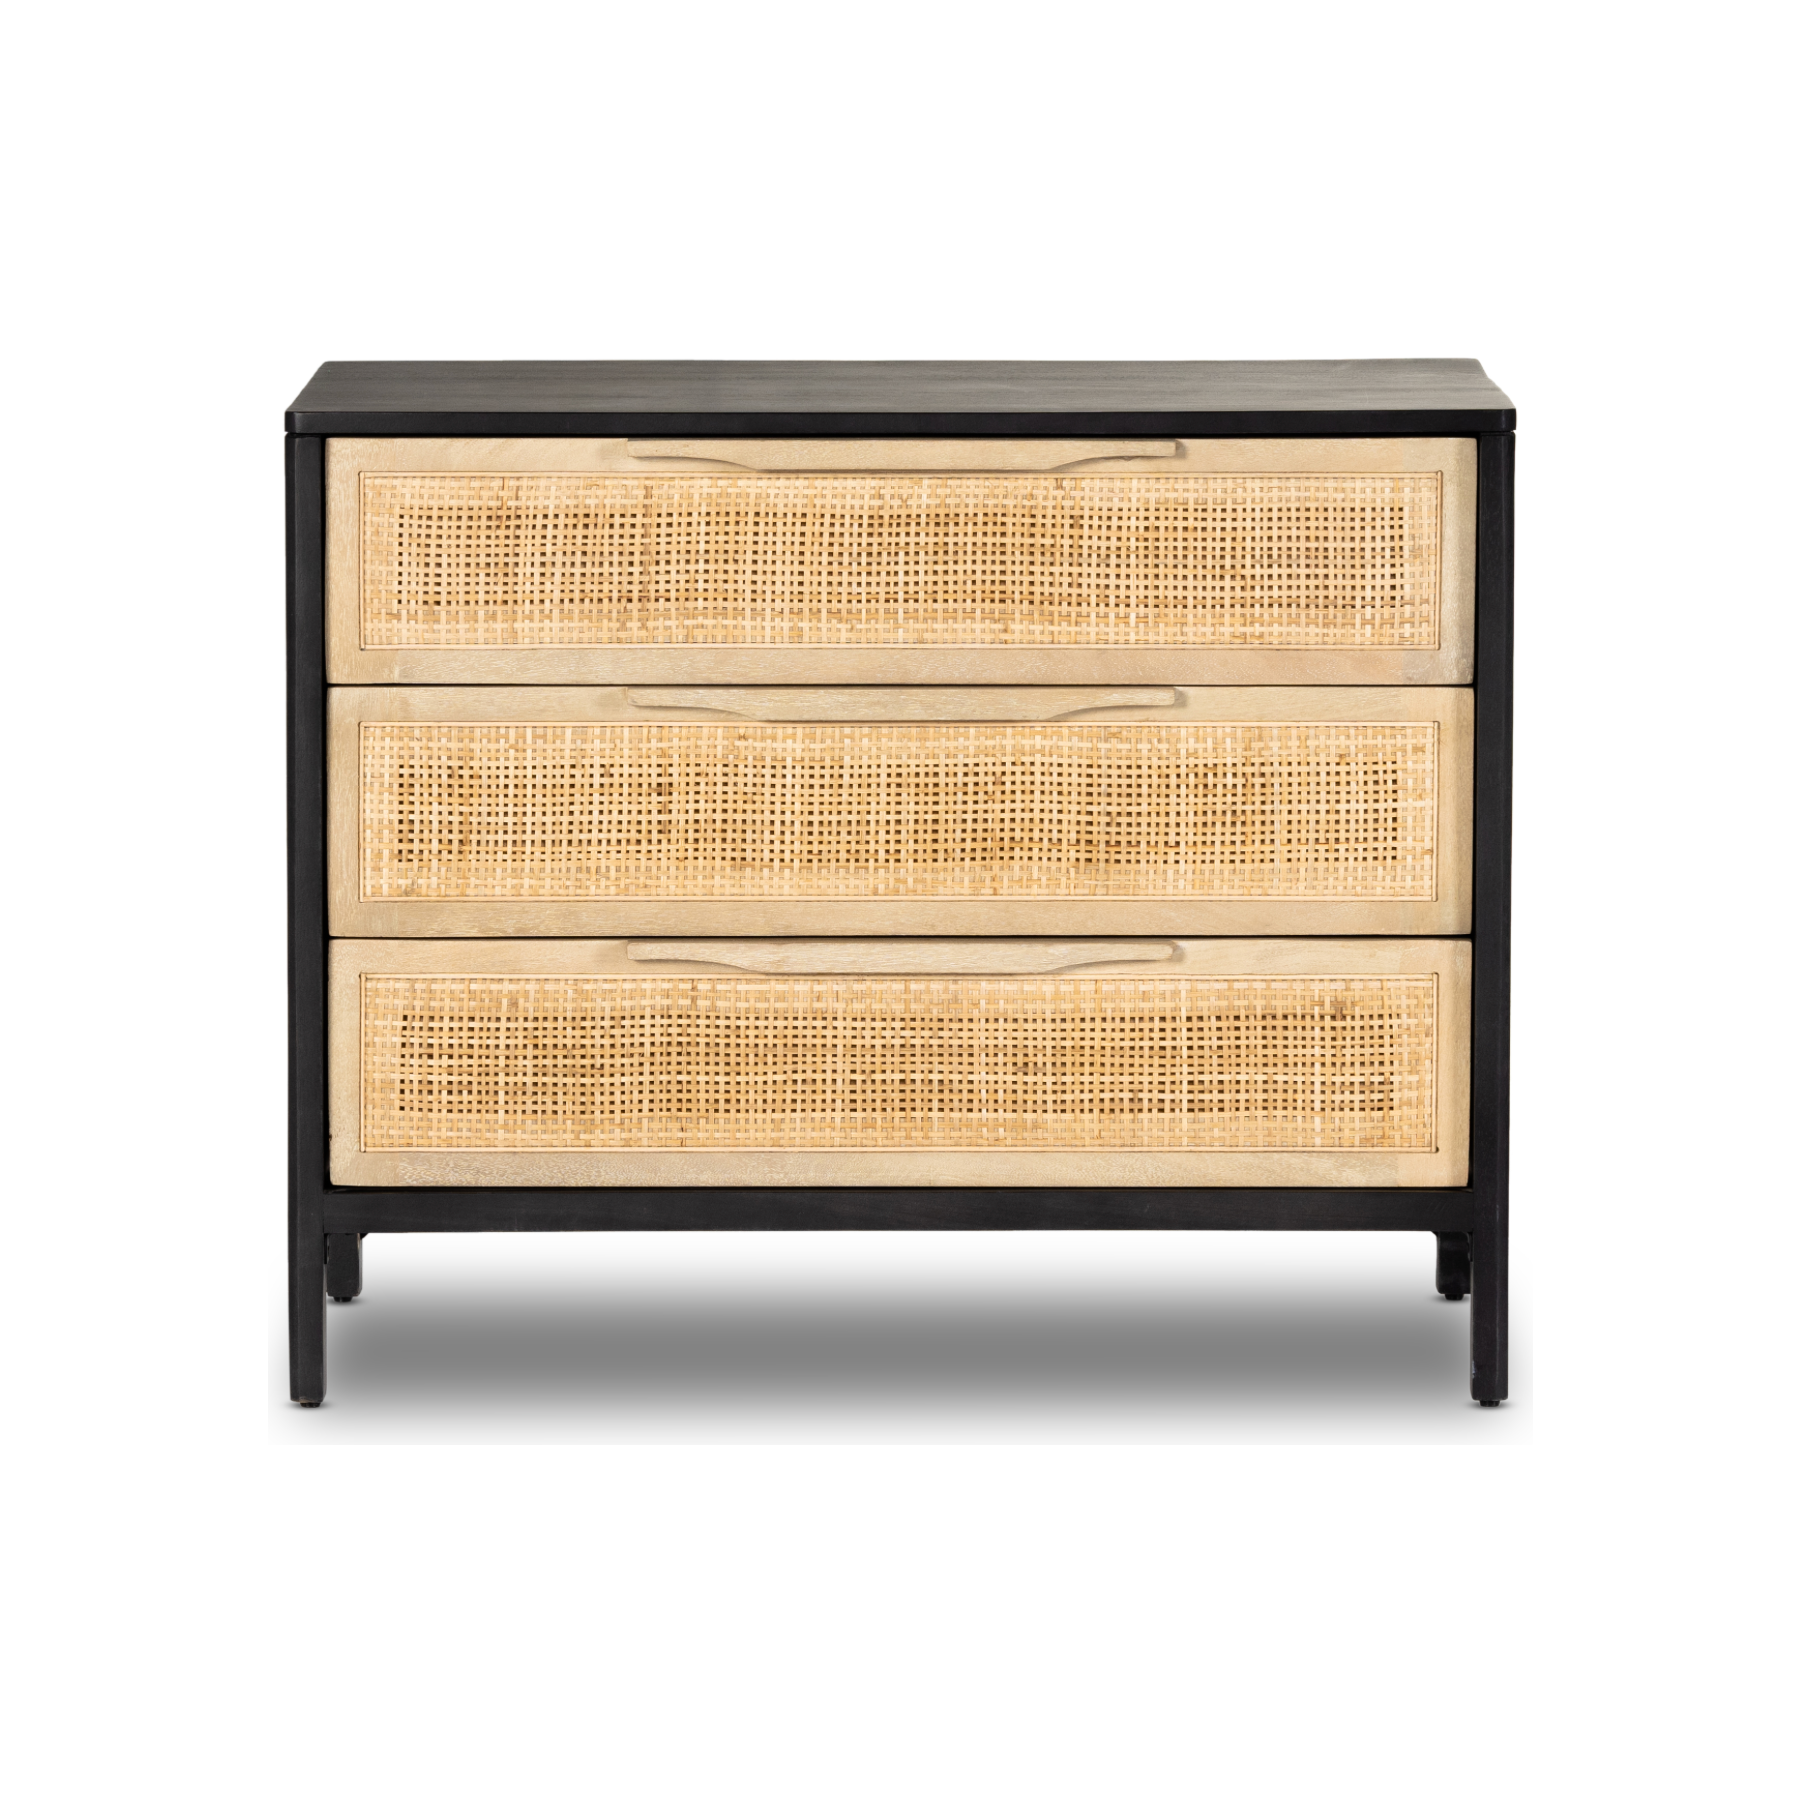 Black wash mango frames inset woven cane, for a light, textural look with organic allure. Three spacious drawers provide plenty of closed storage. Amethyst Home provides interior design, new construction, custom furniture and area rugs in the Austin metro area